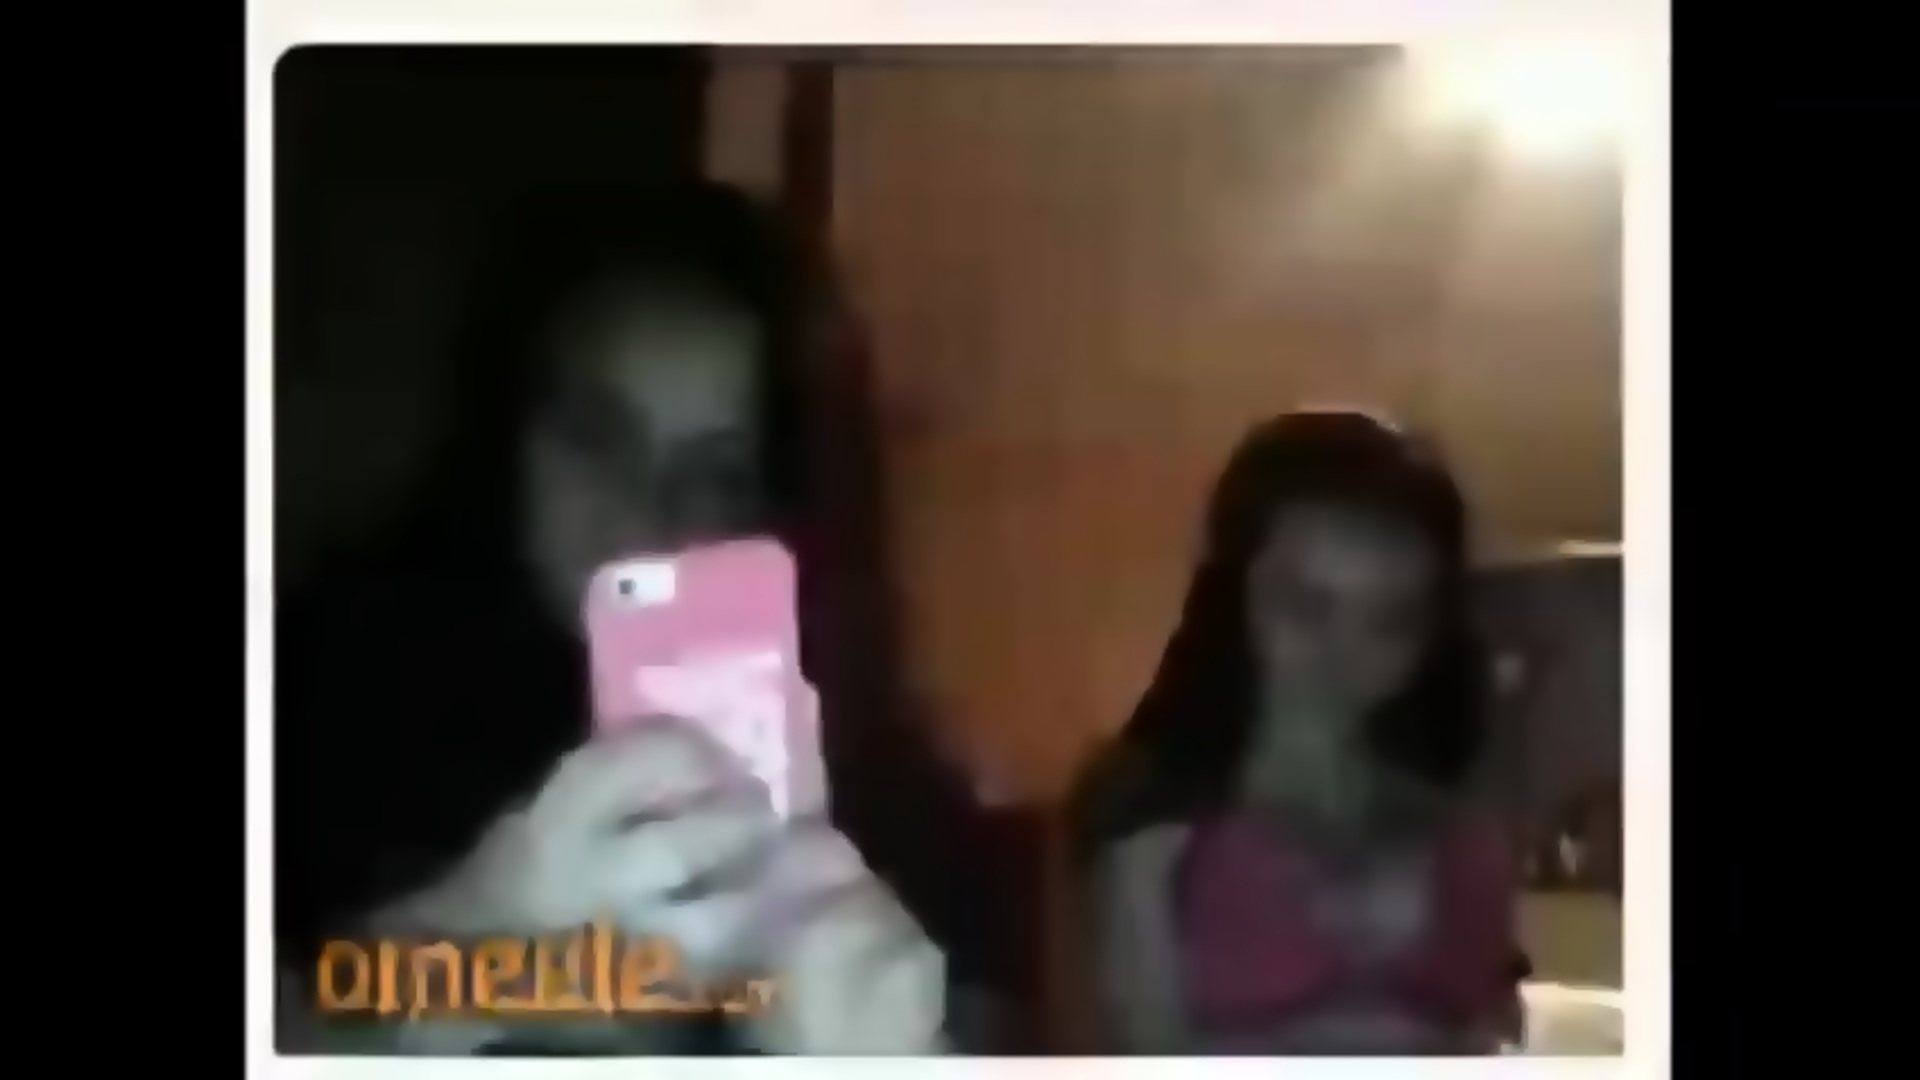 Two omegle girls